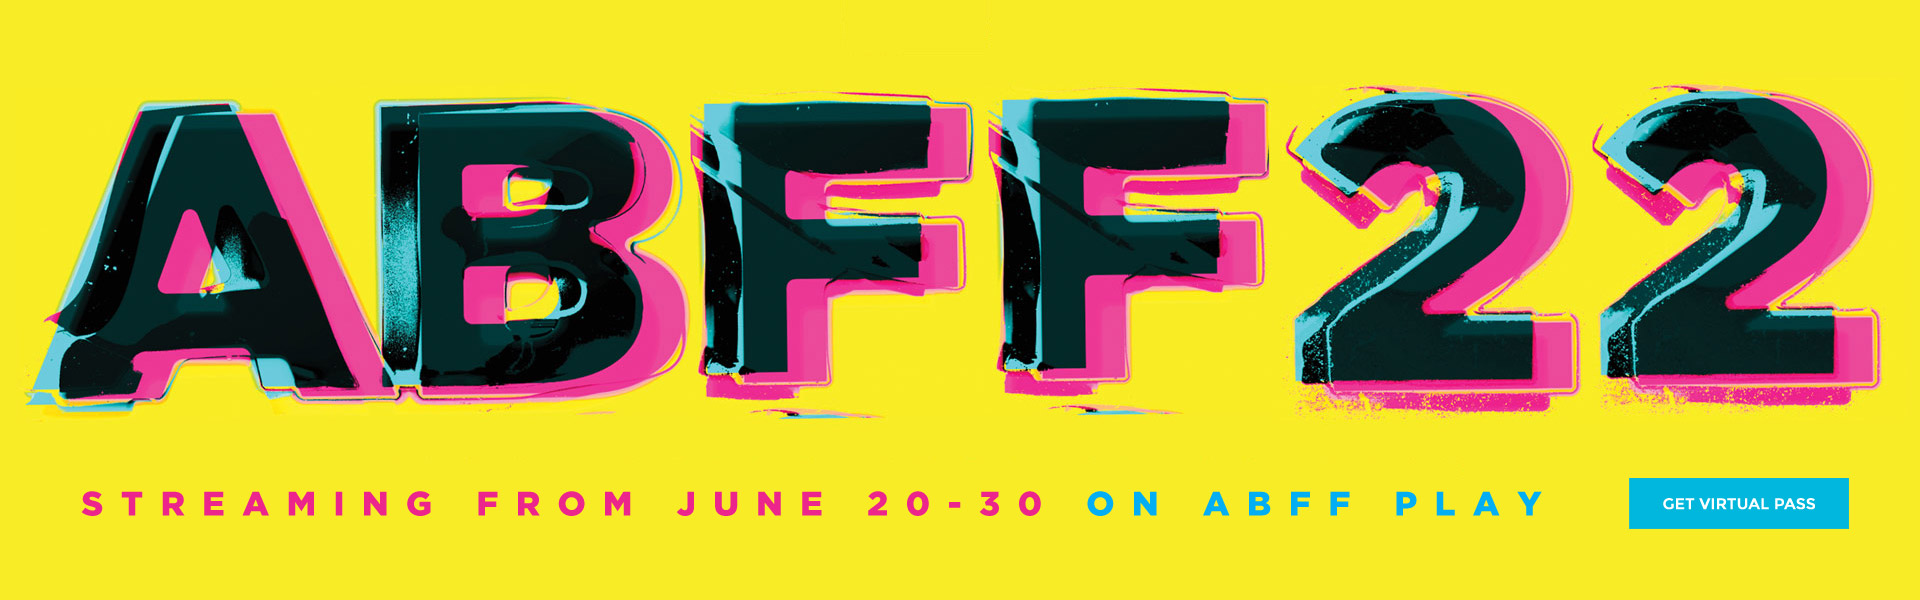 ABFF22 - STREAMING FROM JUNE 20-30 ON ABFF PLAY - Get Virtual Pass